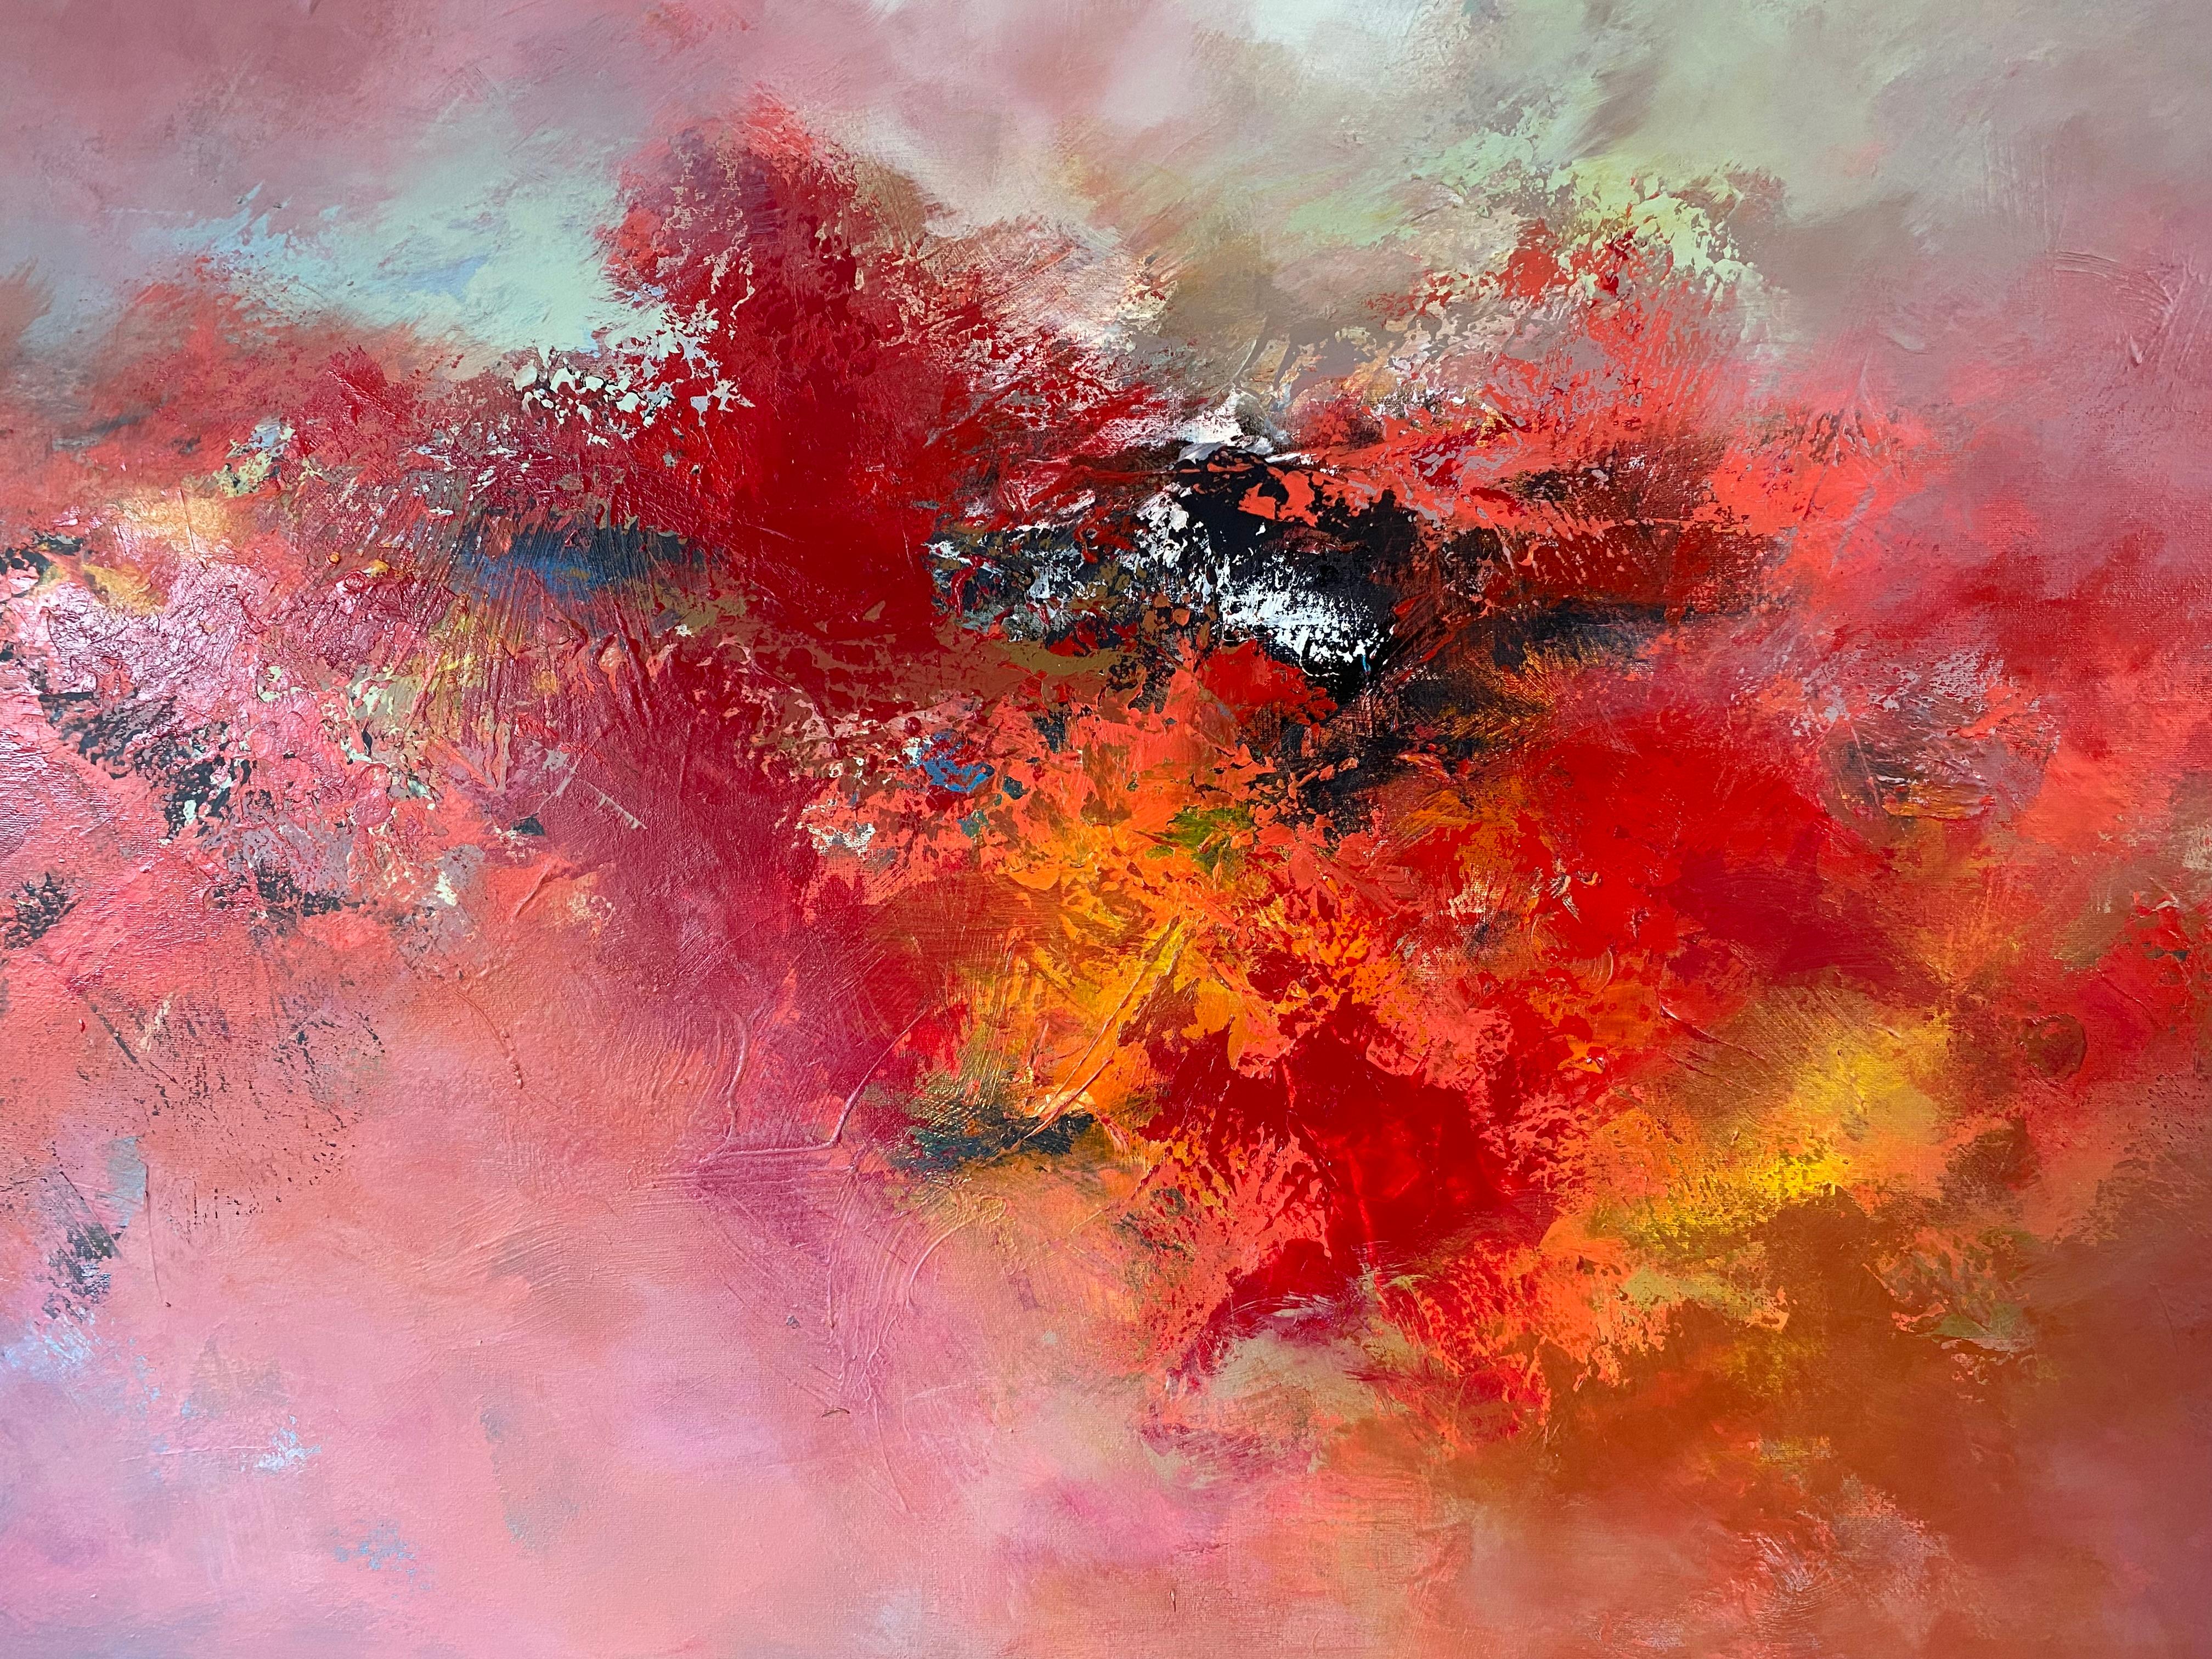 Dancing Pinks, Original painting, Abstract, Landscape  - Painting by  Susanne Winter 